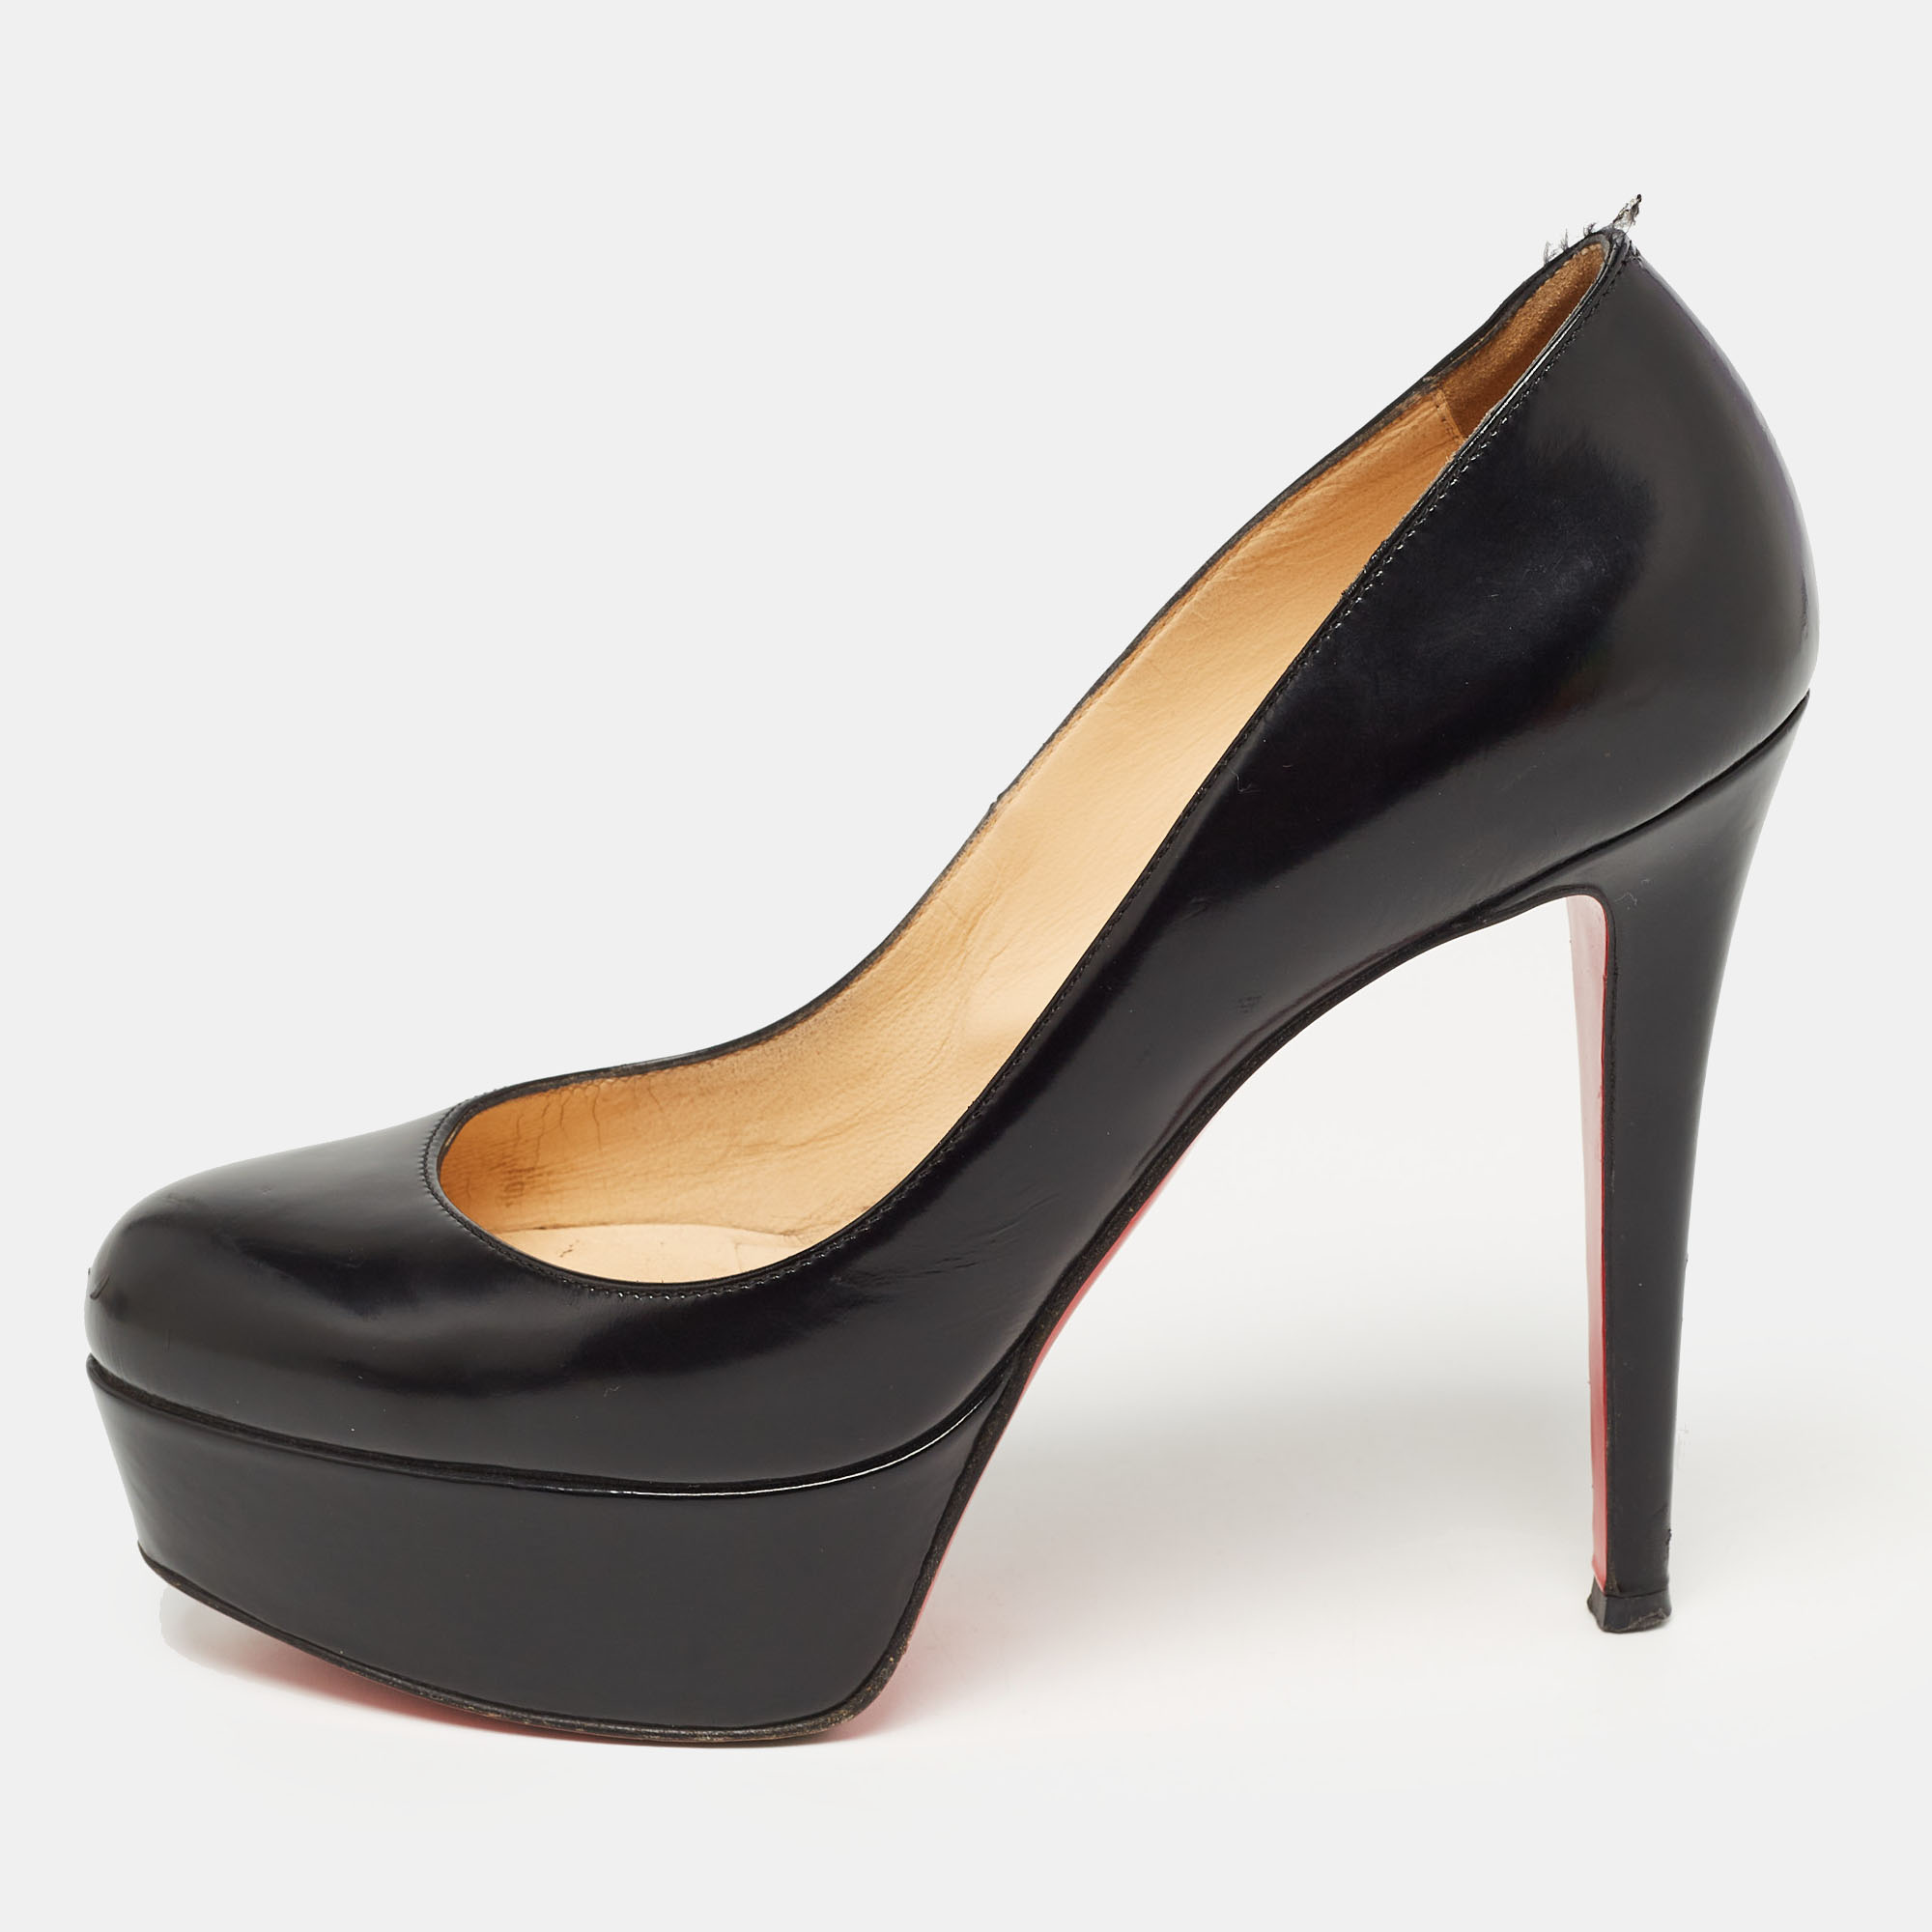 Pre-owned Christian Louboutin Black Leather Bianca Pumps Size 36